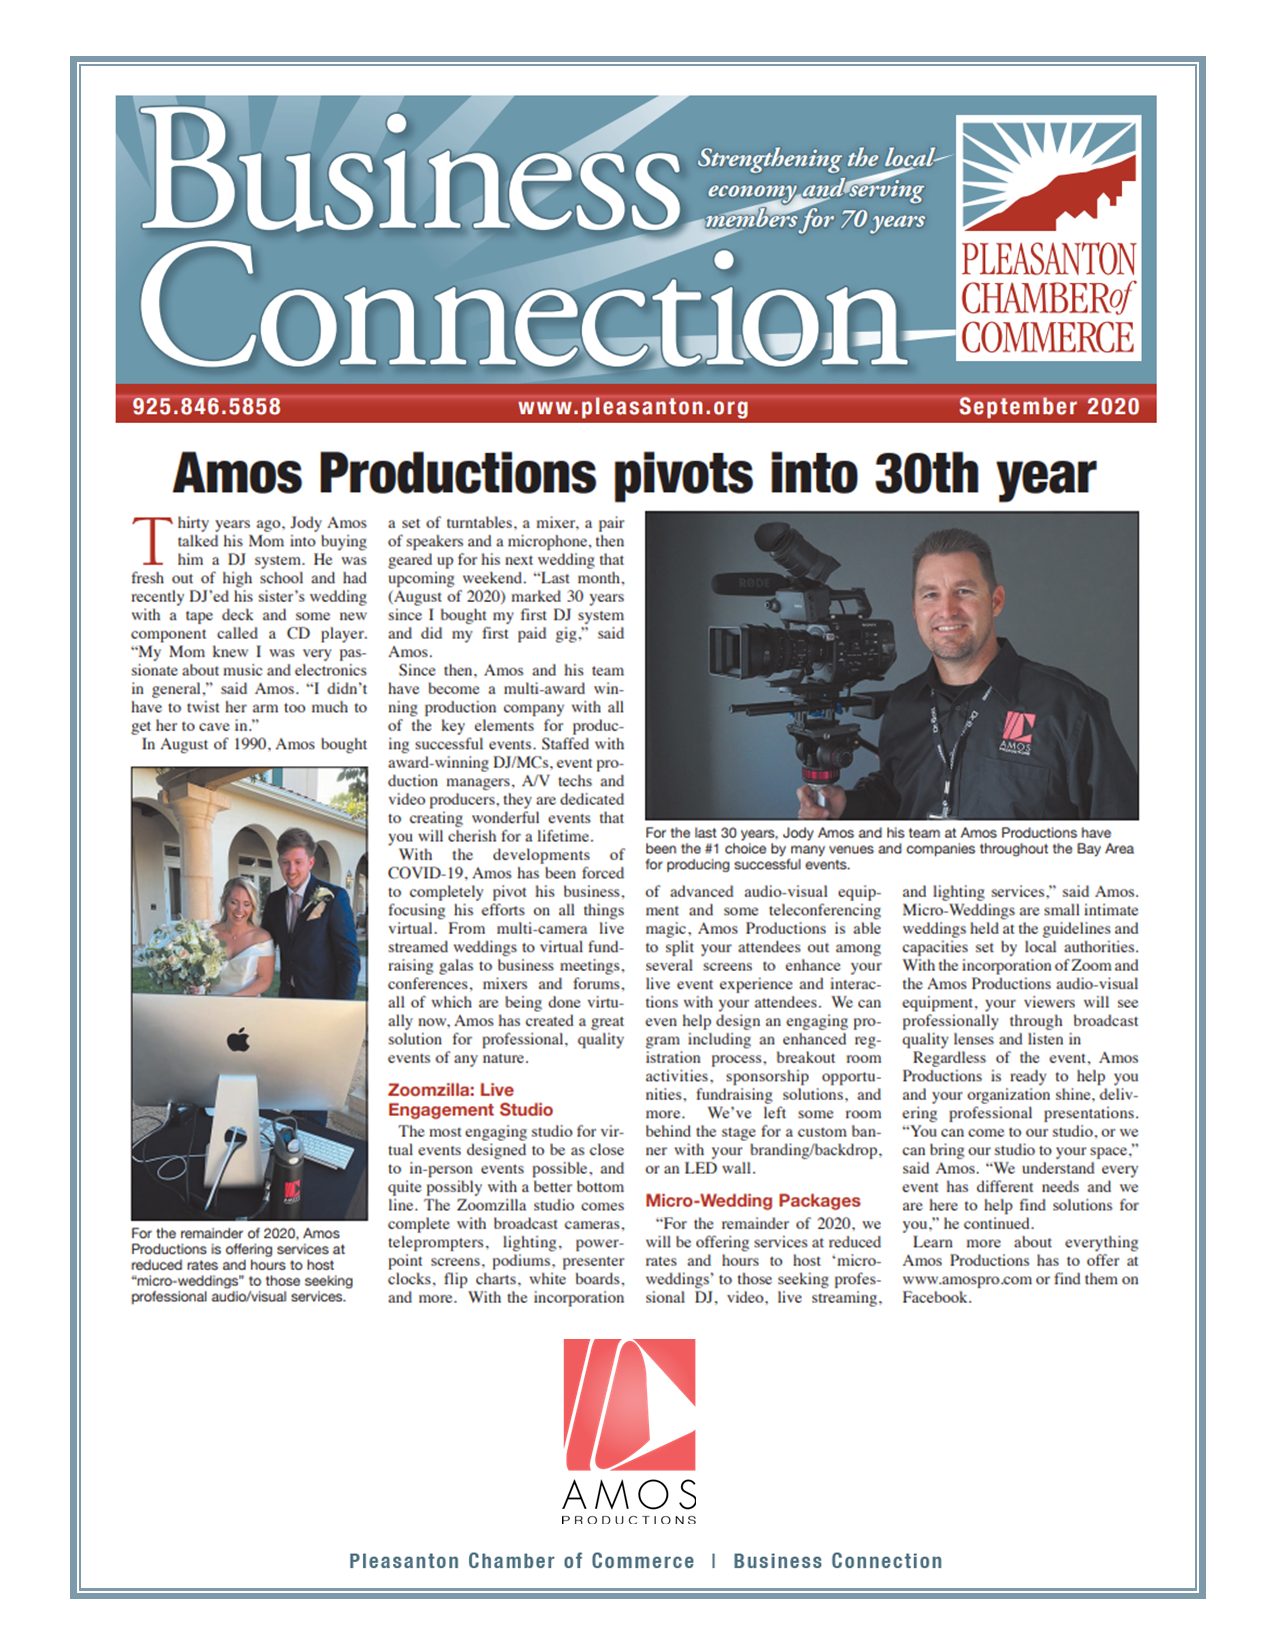 Amos Productions article